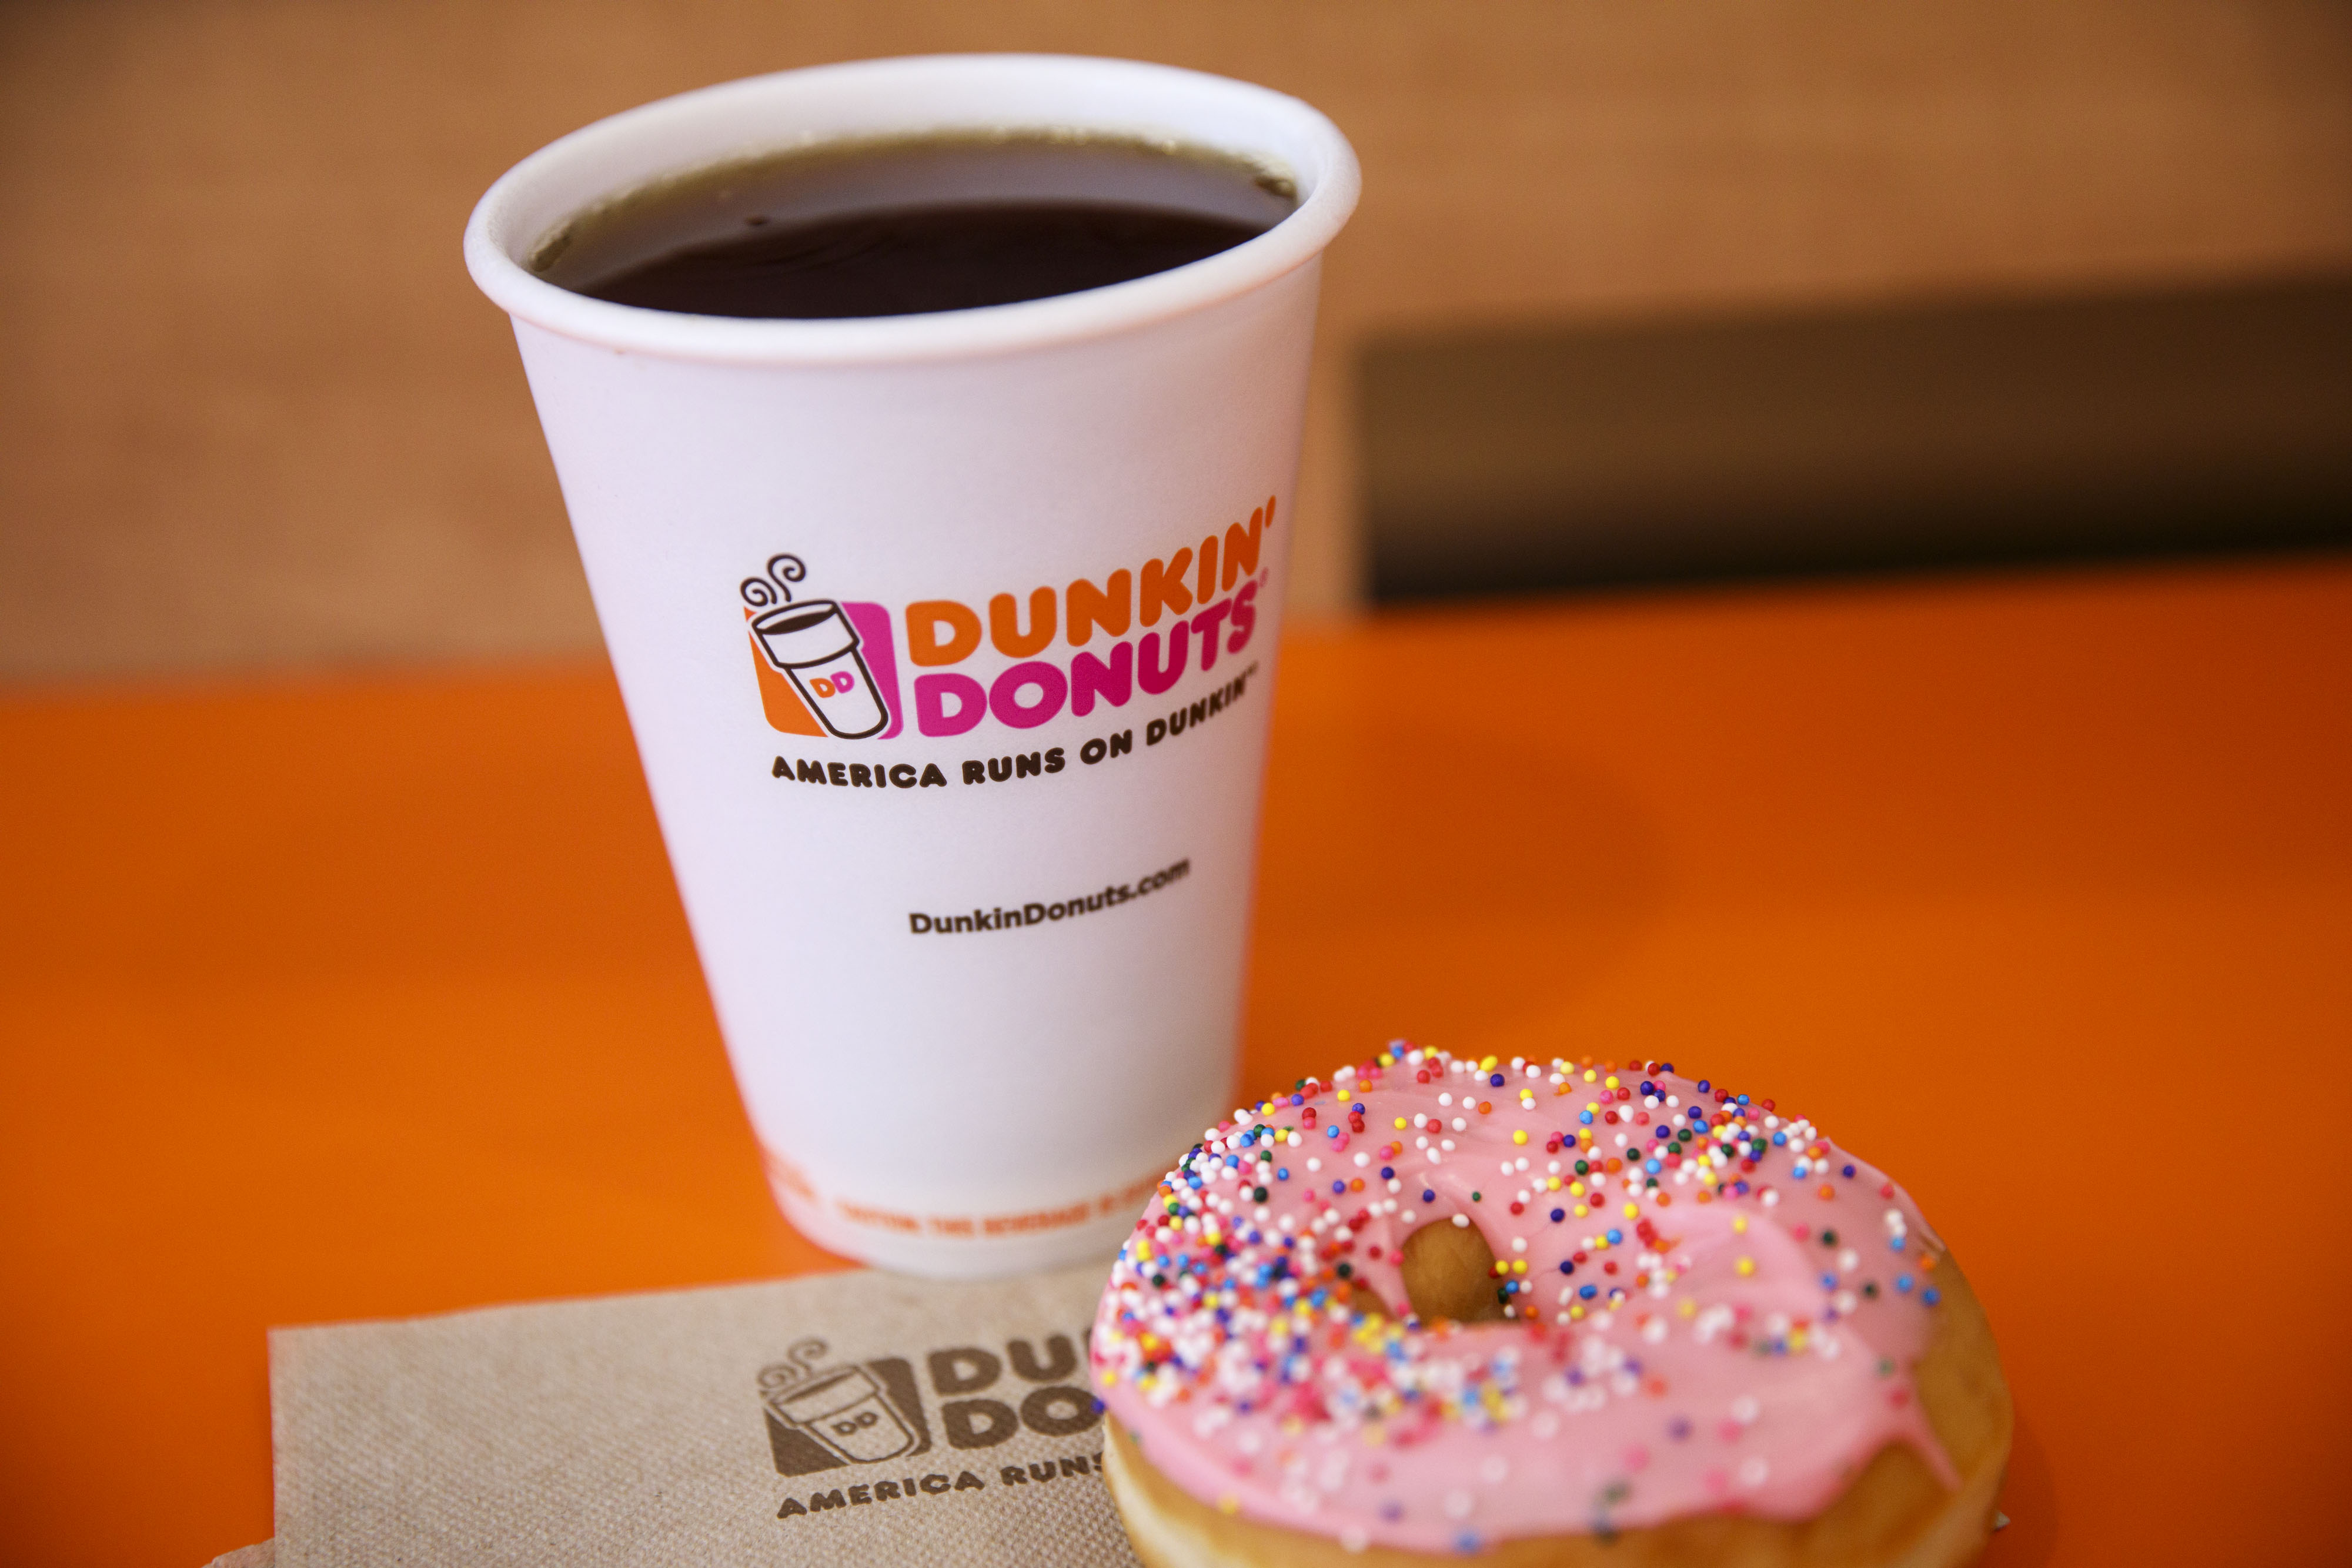 You Can Get a Free Dunkin' Donuts Gift Card If You Donate Blood in January